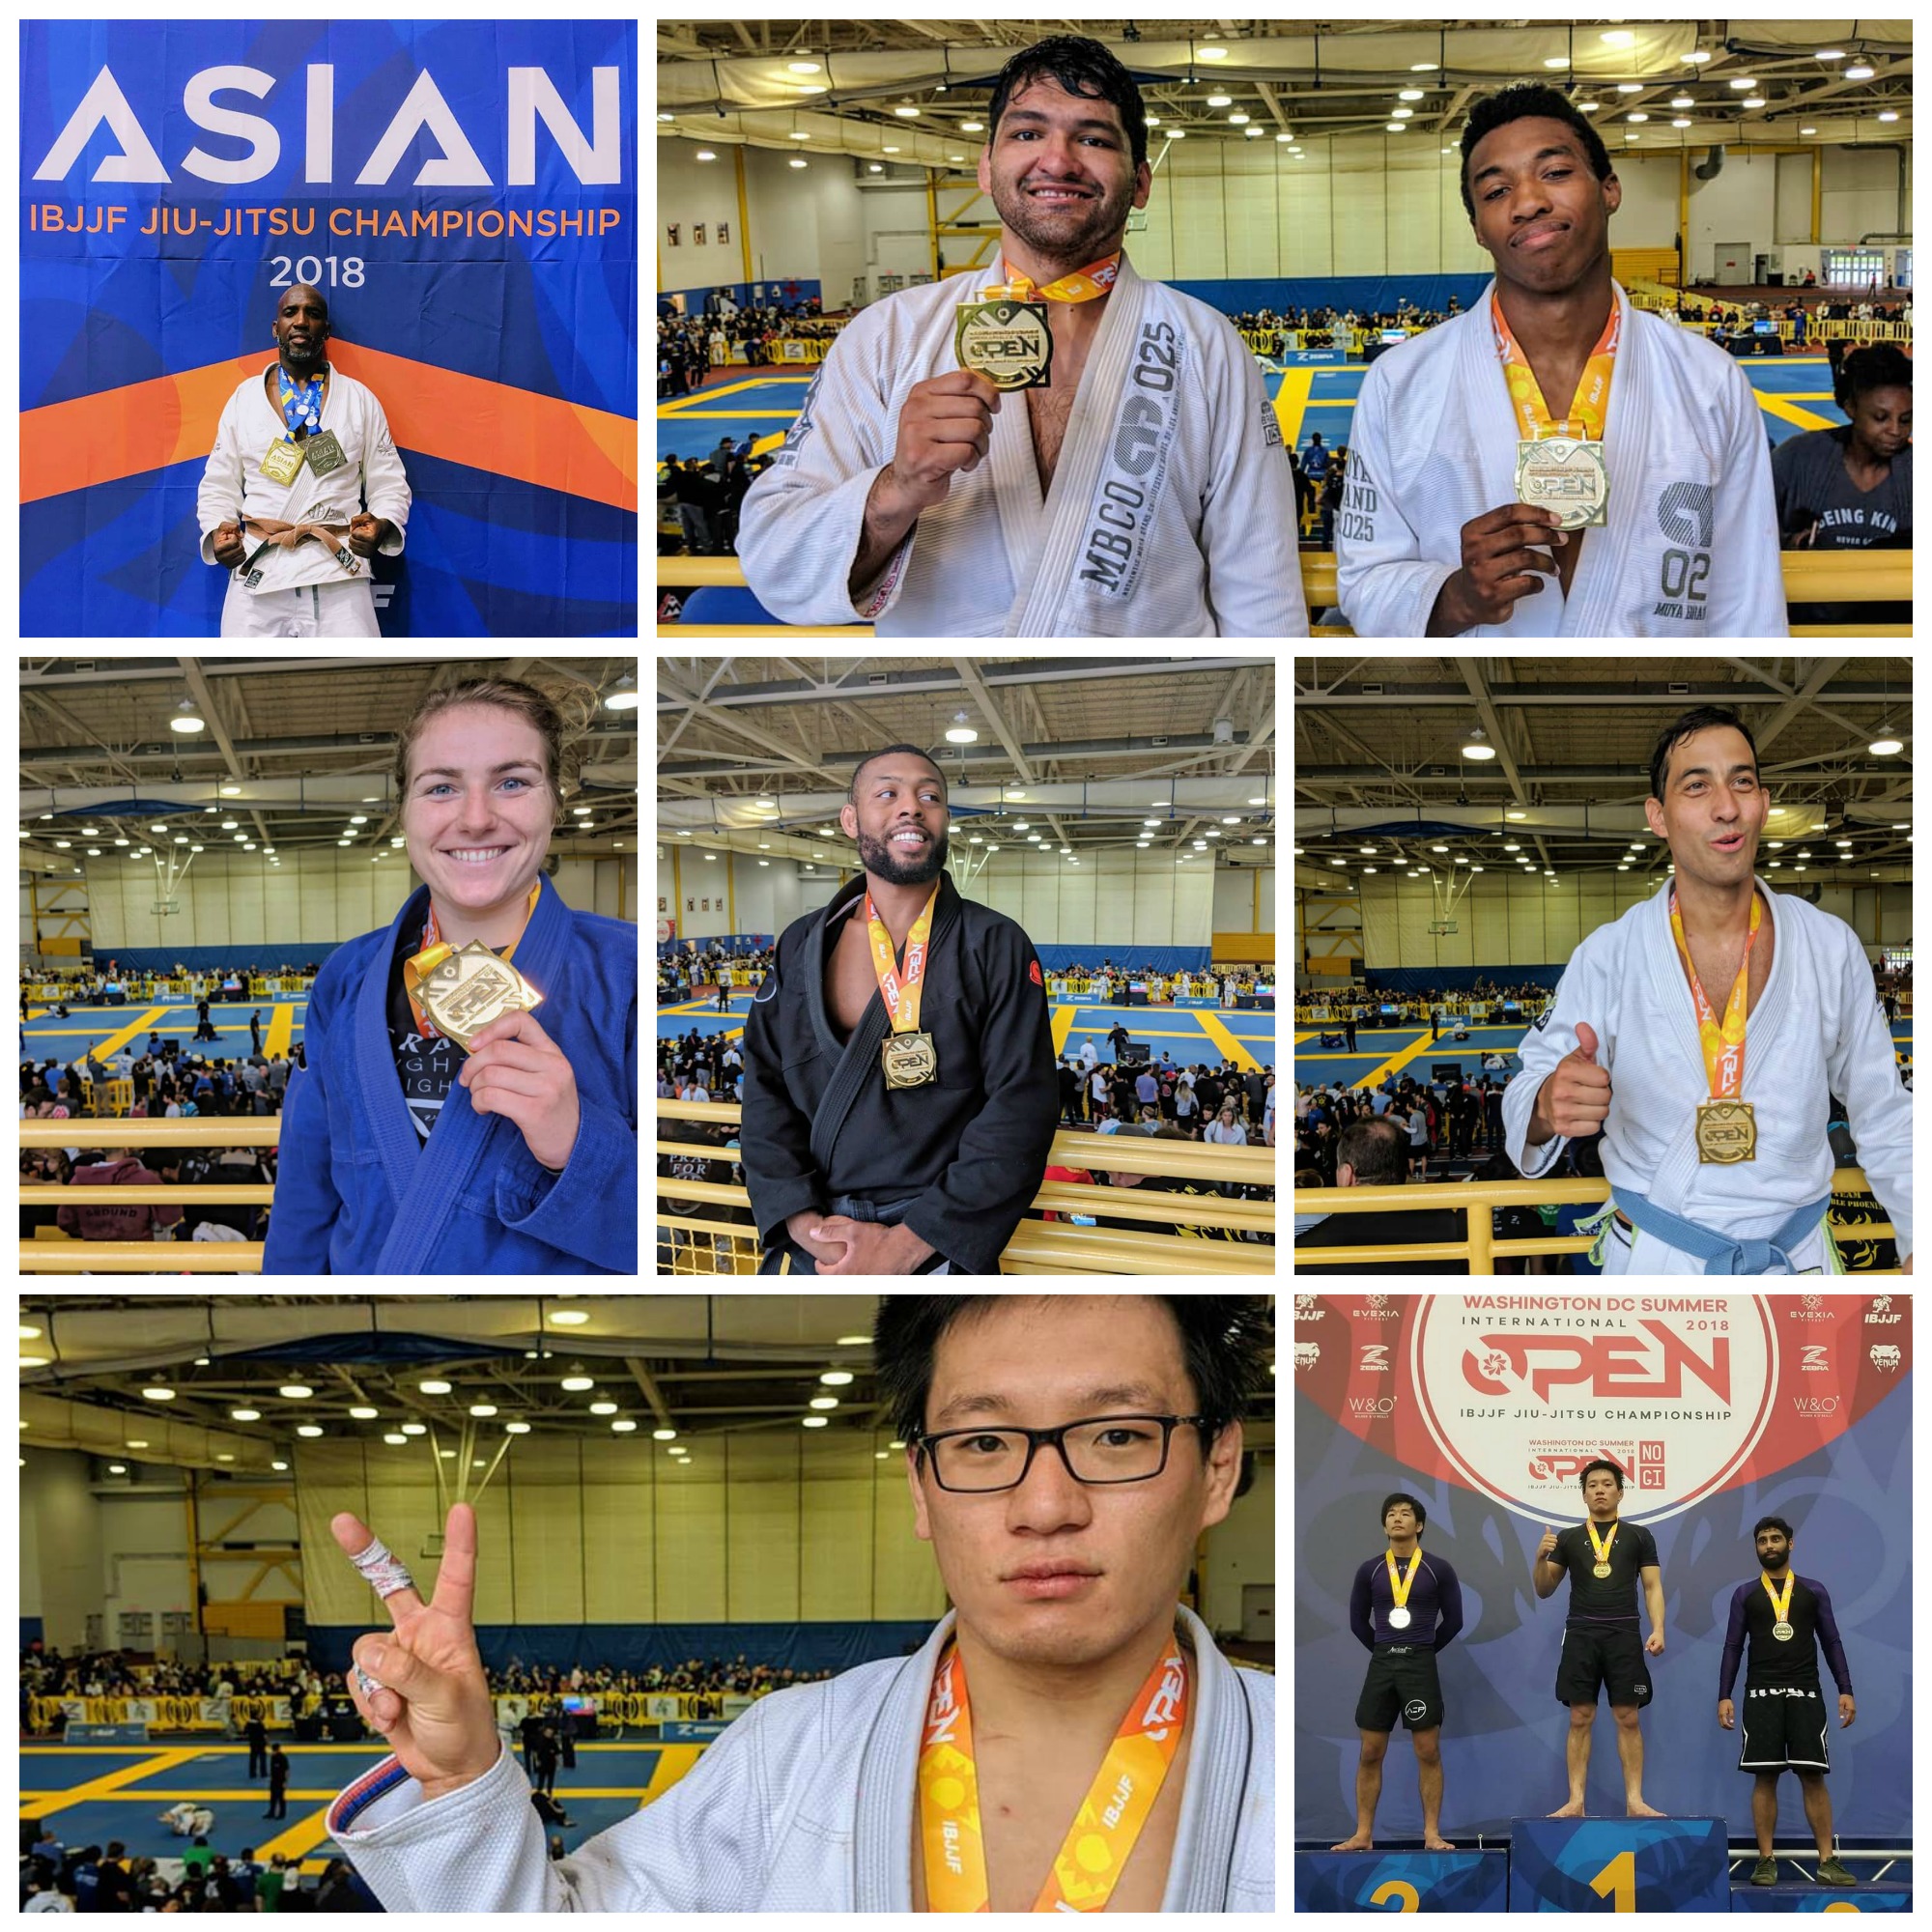 Maryland BJJ gym Crazy 88 competes against local schools at IBJJF DC Open Successful 2018 IBJJF DC Summer In The Books